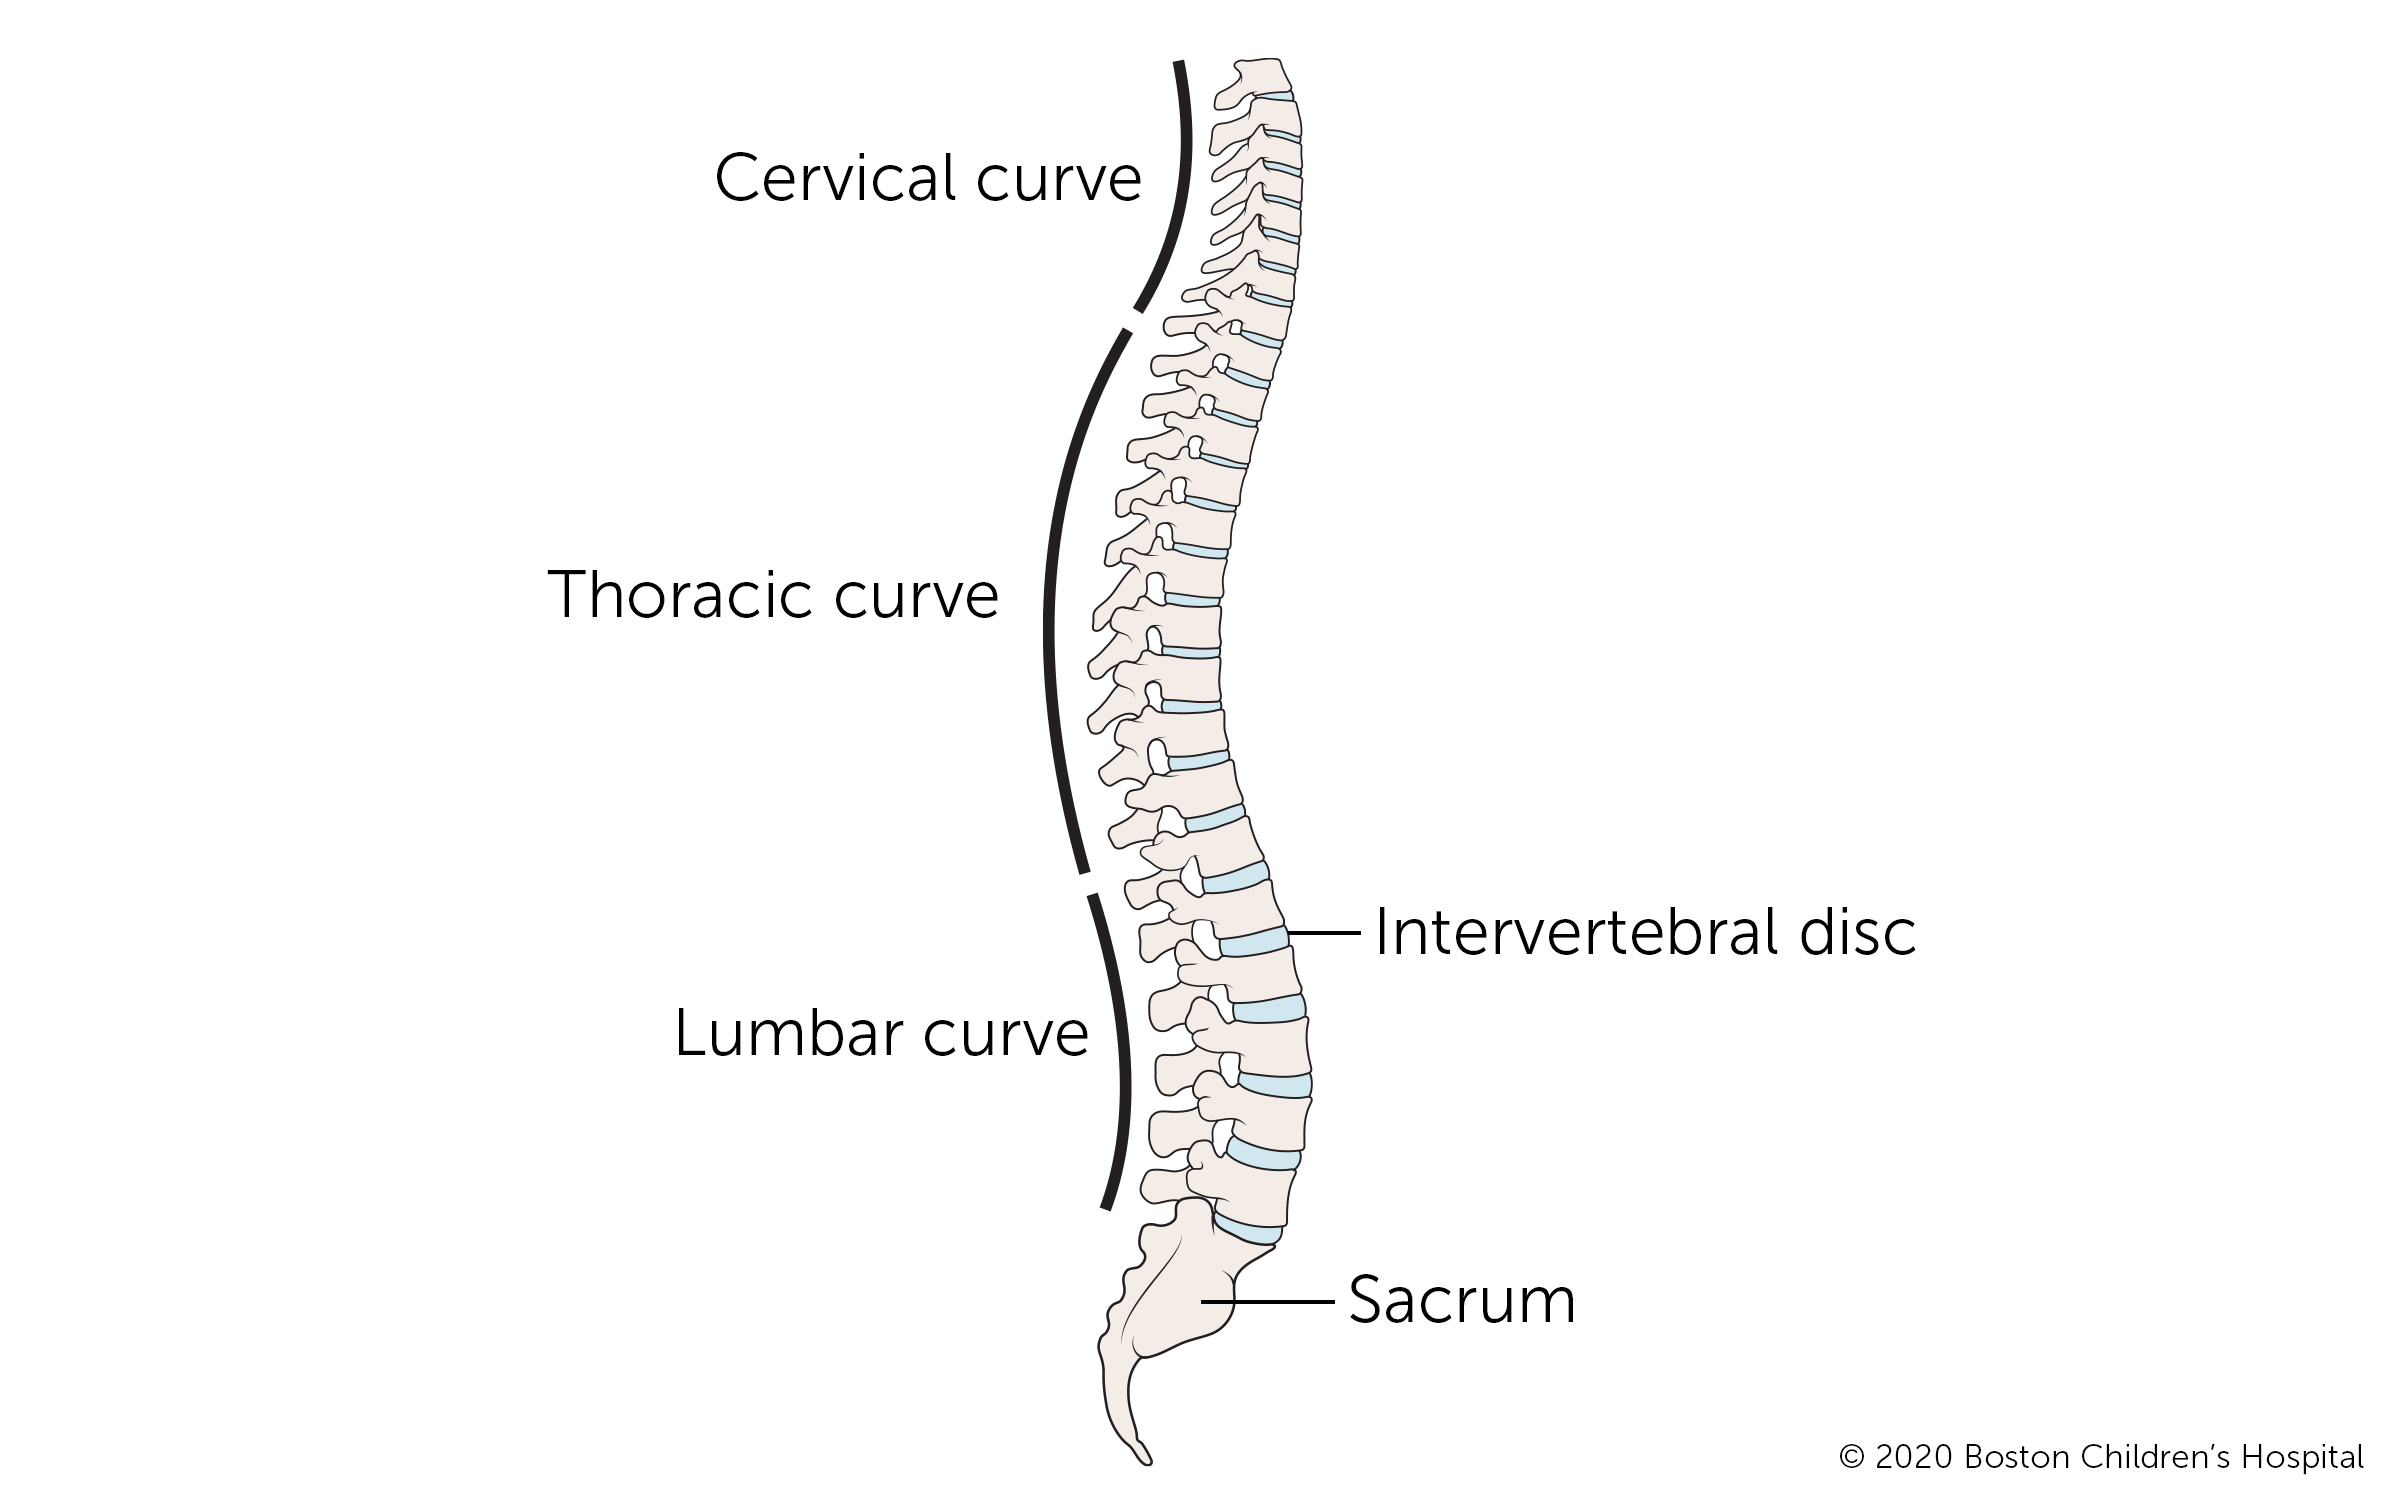 Here is the anatomy of the spine.